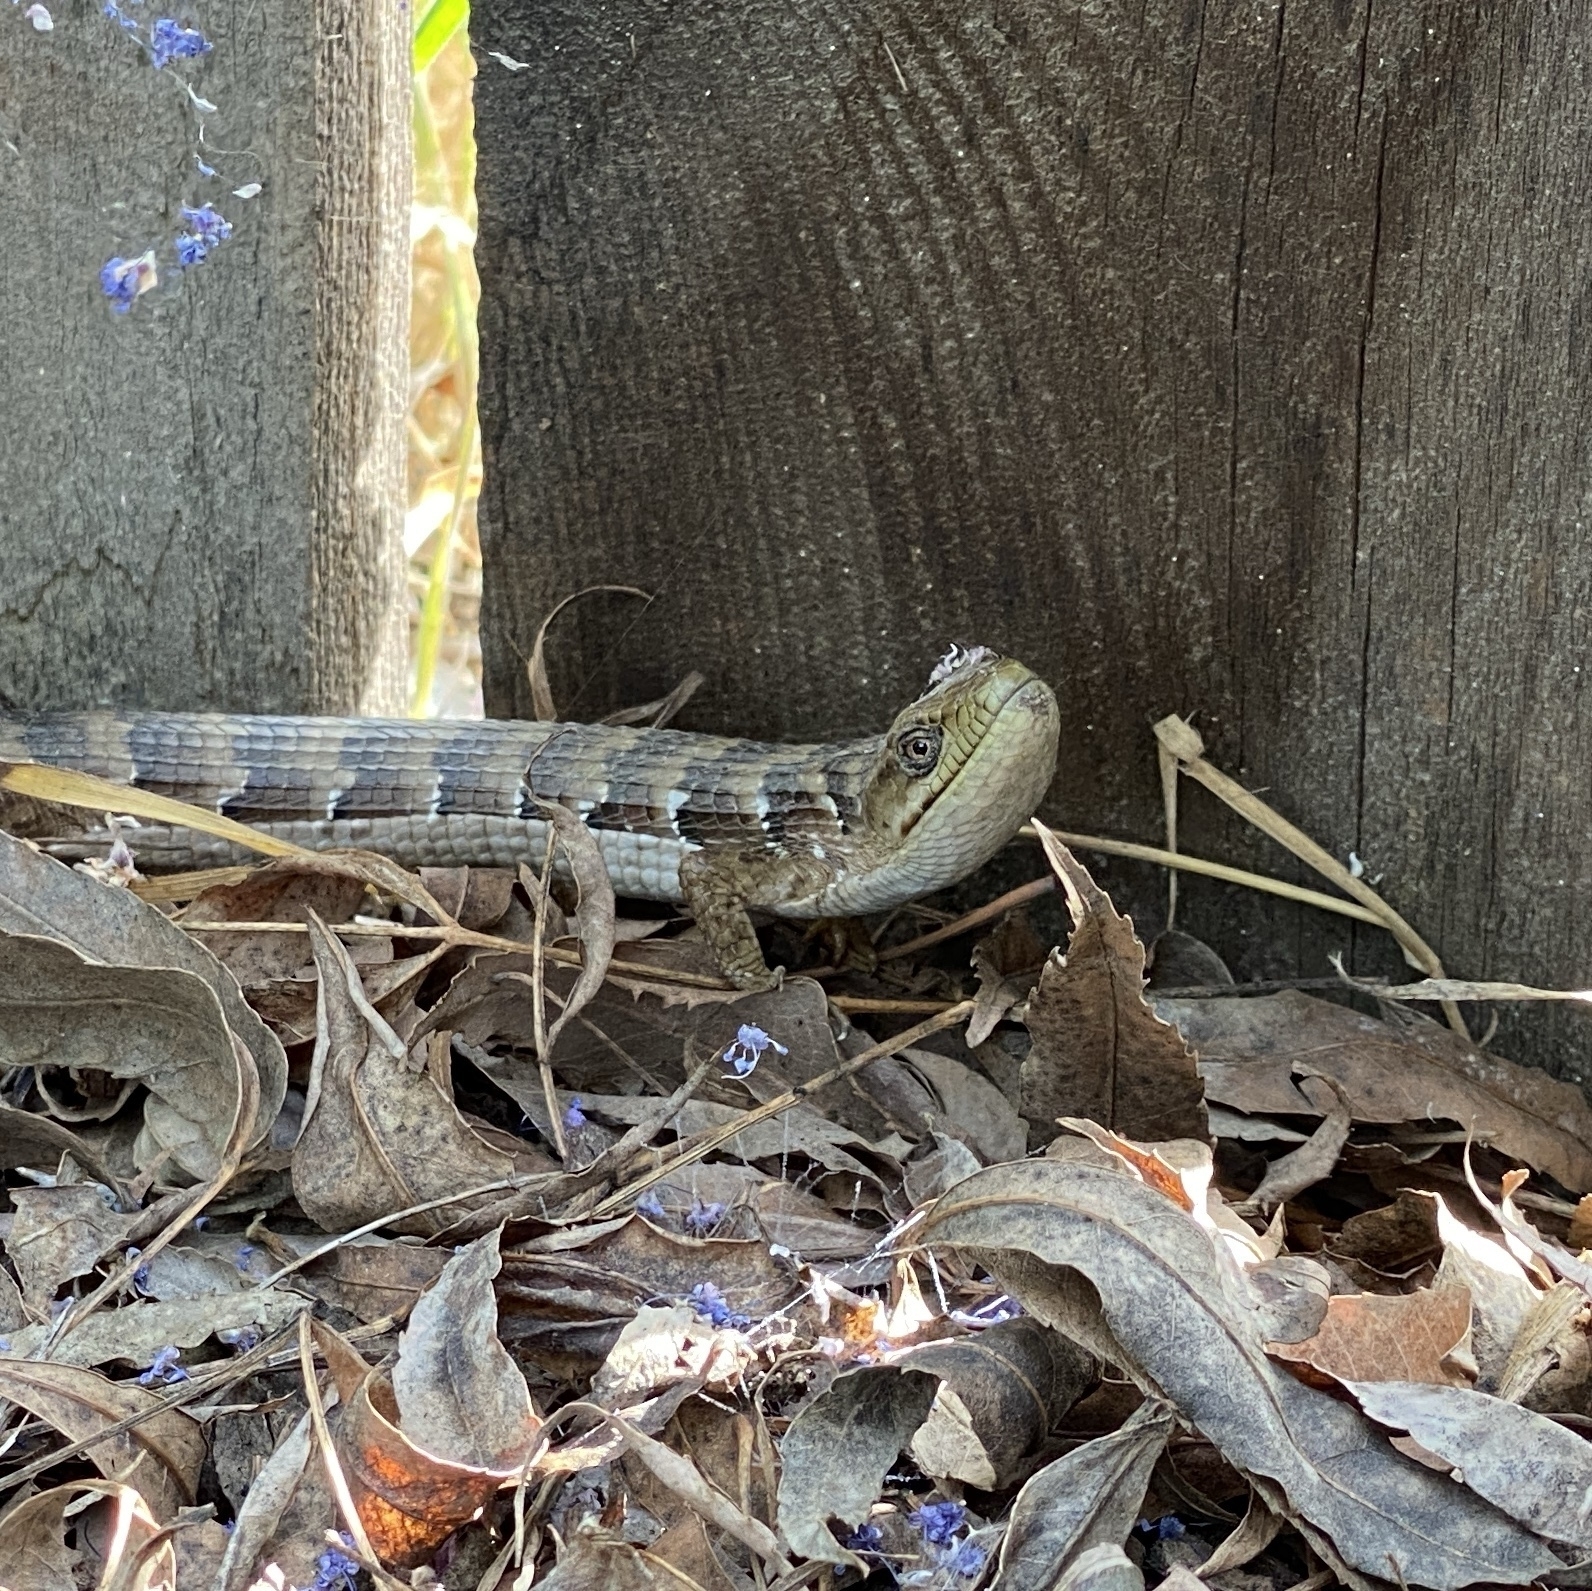 alligator lizard at bottom of fence looking at the camera.